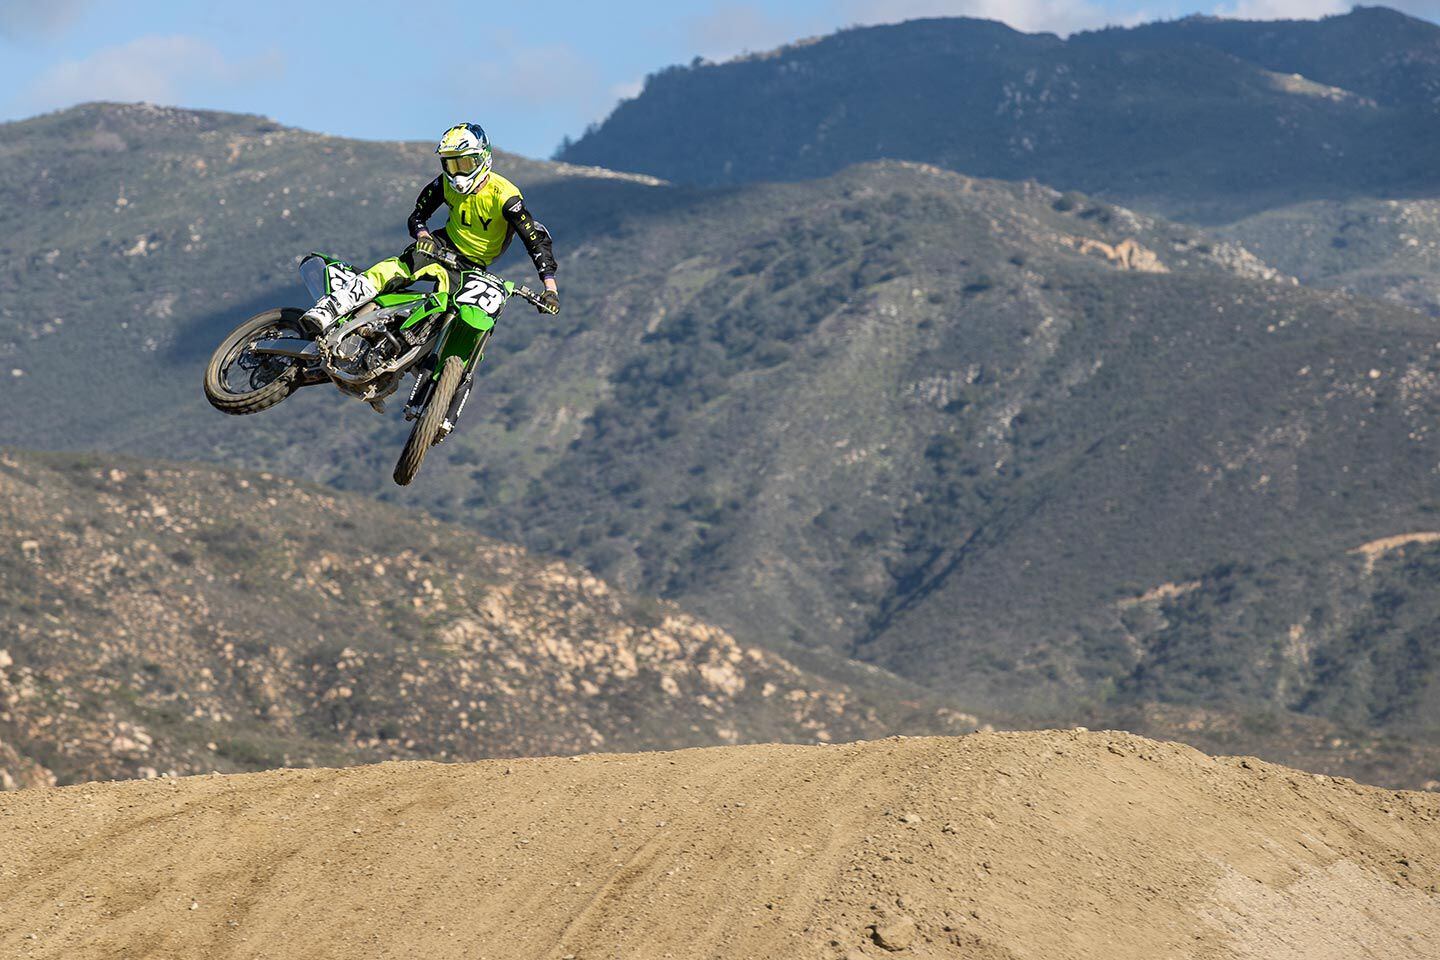 “The KX250 is very flickable in the air, which I’m sure younger and faster riders would appreciate.” <i>—Michael Wicker</i>